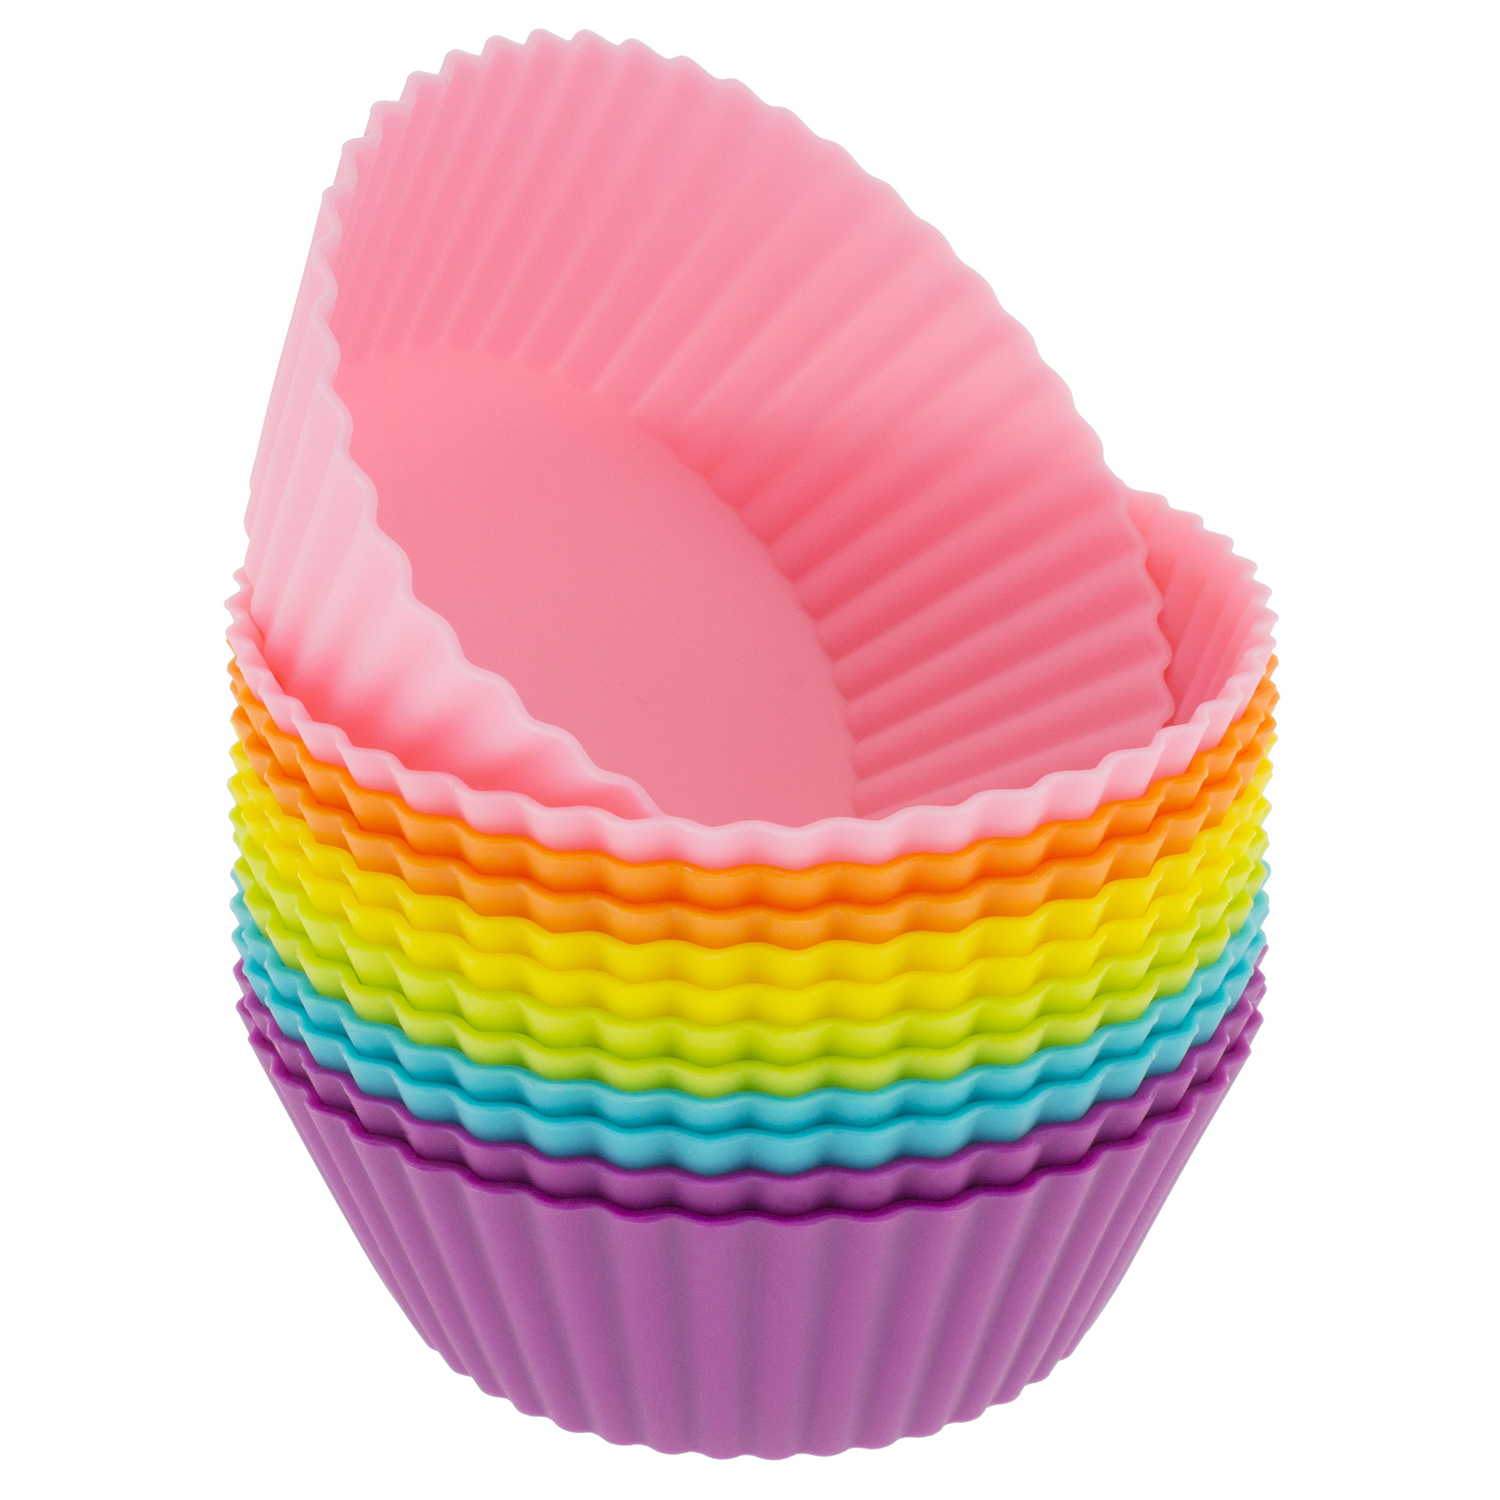 Freshware Silicone Cupcake Liners / Baking Cups - 12-Pack Muffin Molds, 2-6/8 inch Round, Six Vibrant Colors